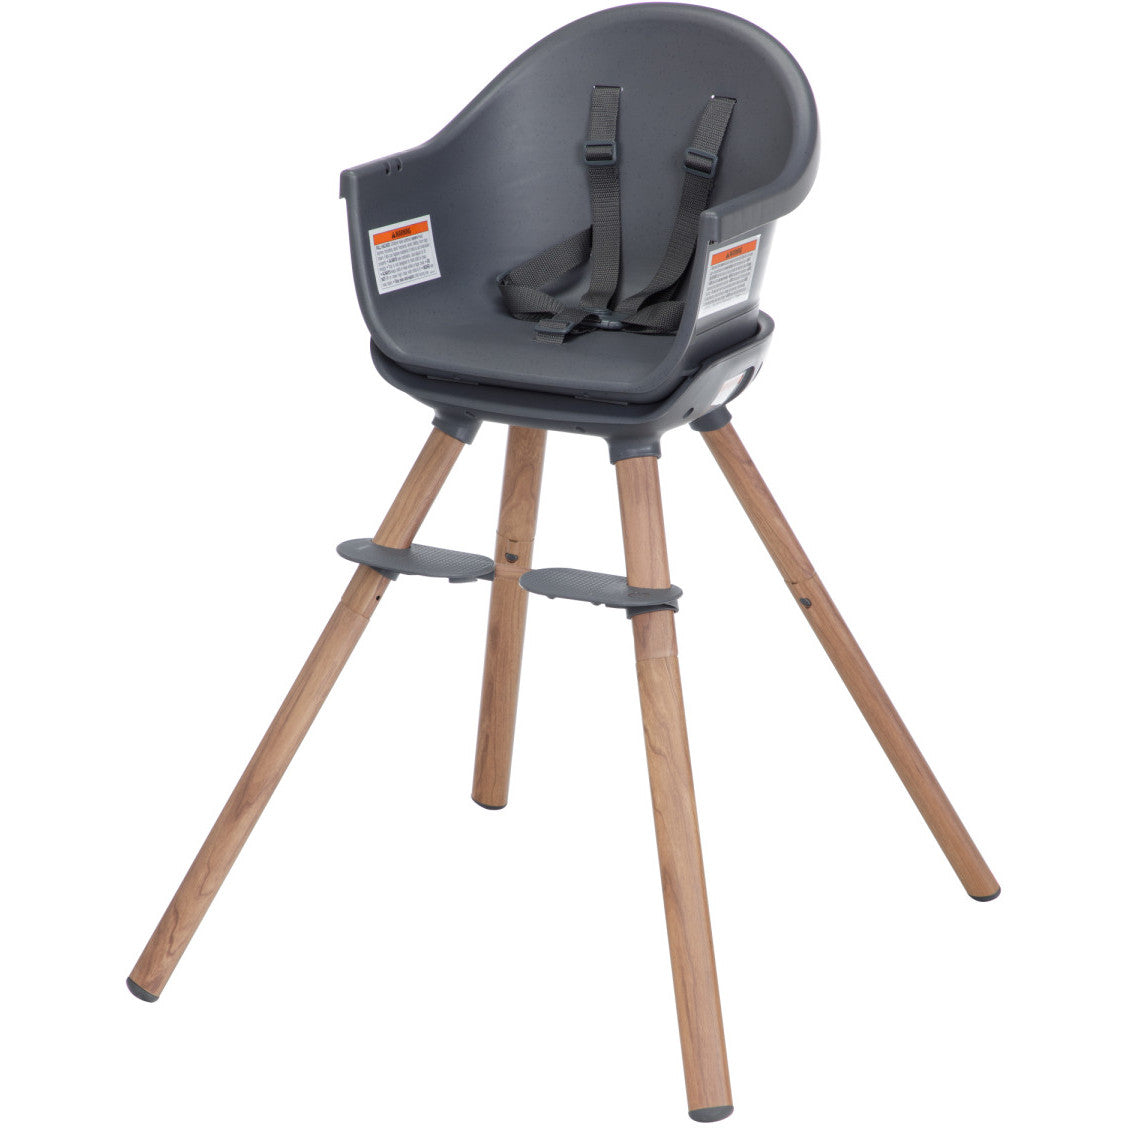 Buy essential-graphite Maxi-Cosi Moa 8-in-1 High Chair